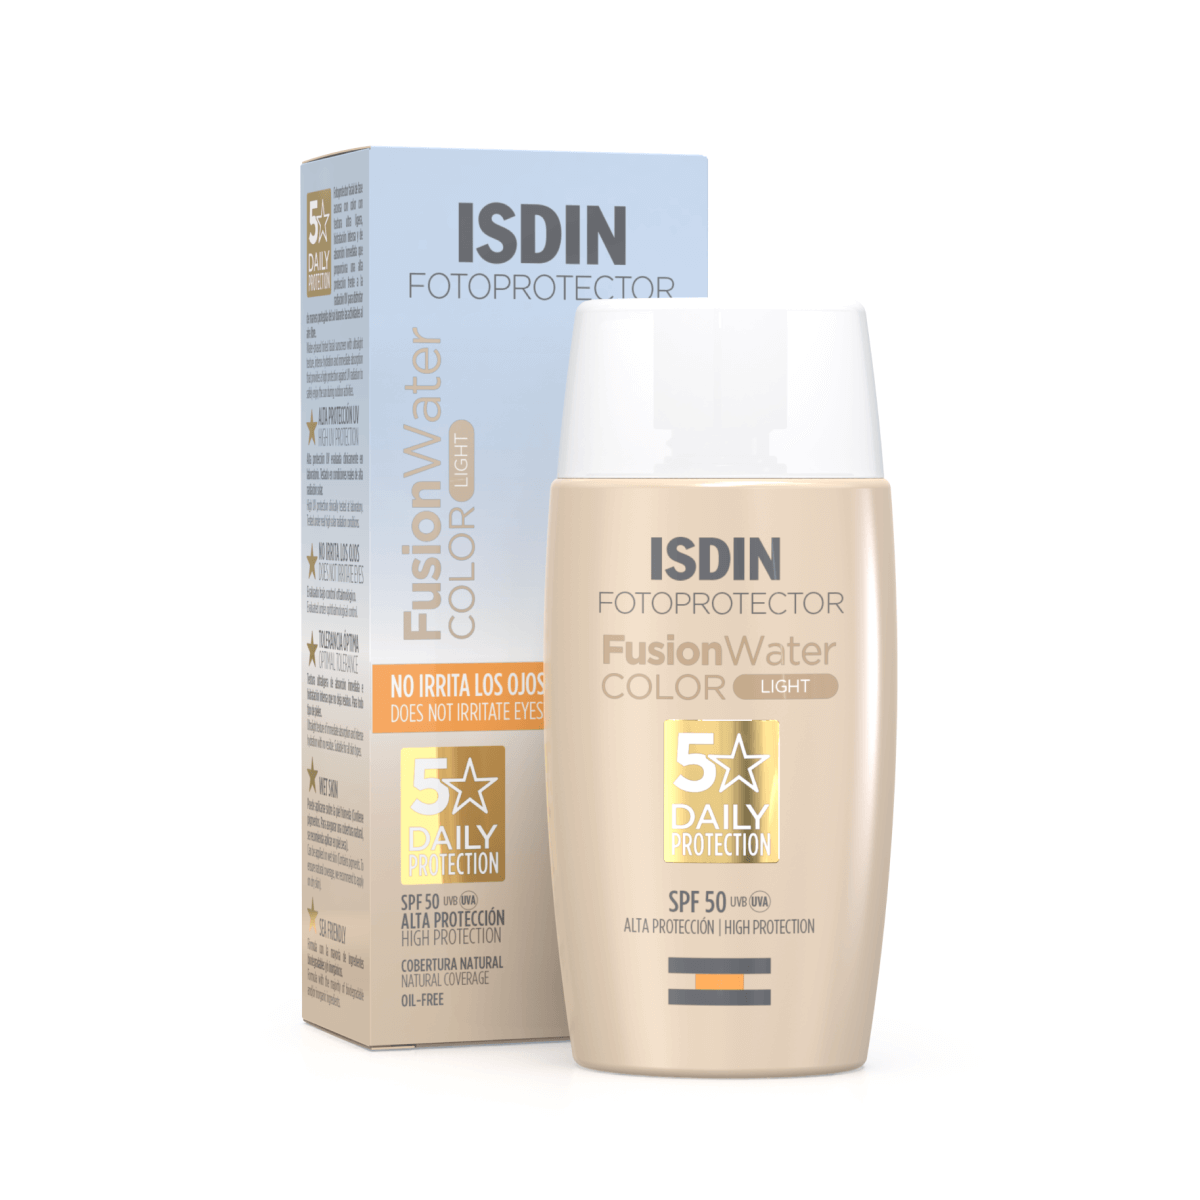 ISDIN FOTOPROTECTOR FUSION WATER COLOR LIGHT SPF 50 